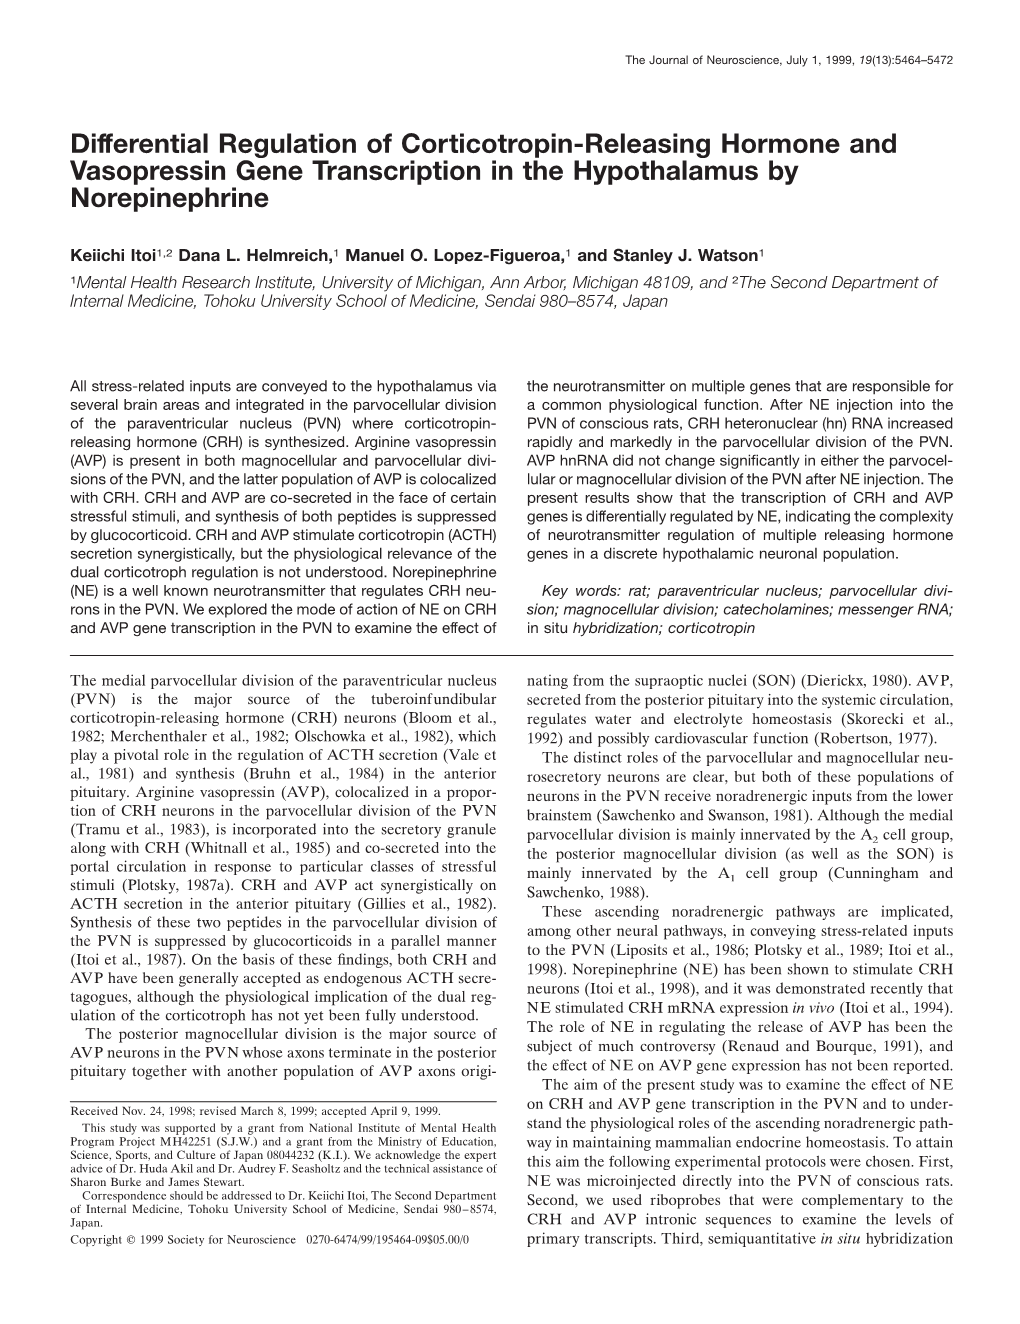 Differential Regulation of Corticotropin-Releasing Hormone and Vasopressin Gene Transcription in the Hypothalamus by Norepinephrine